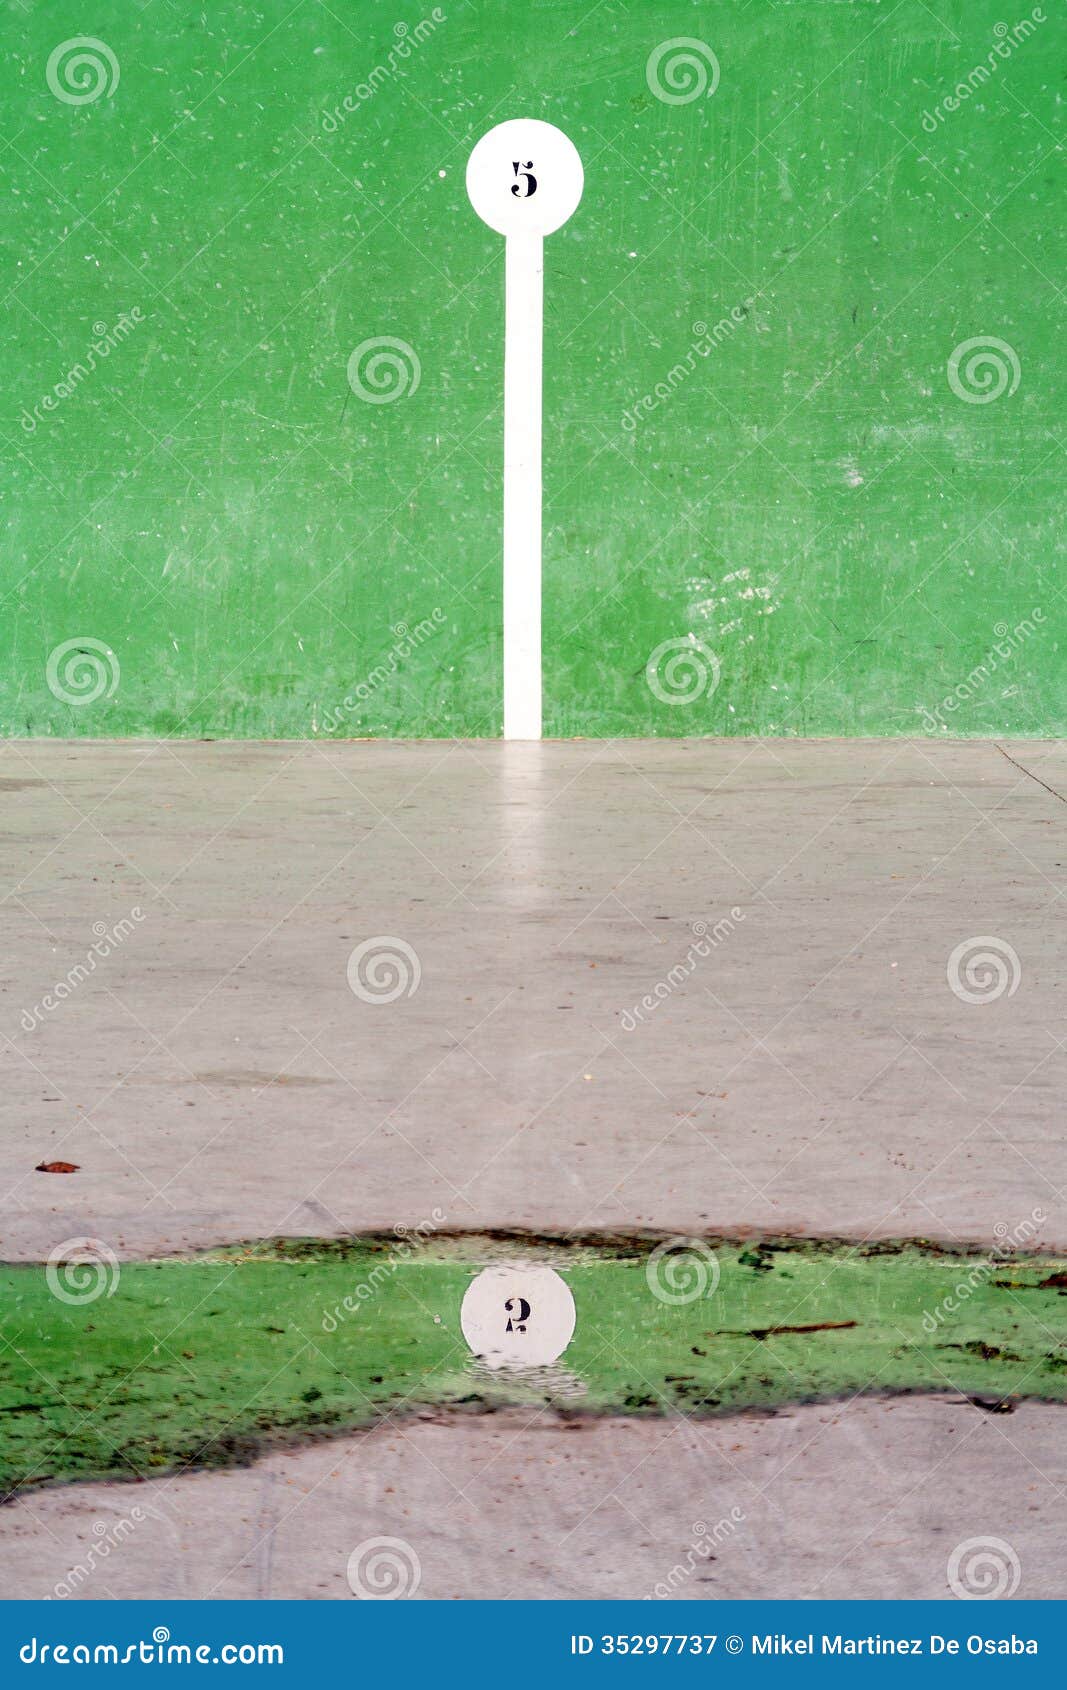 basque pelota court with number reflection on puddle